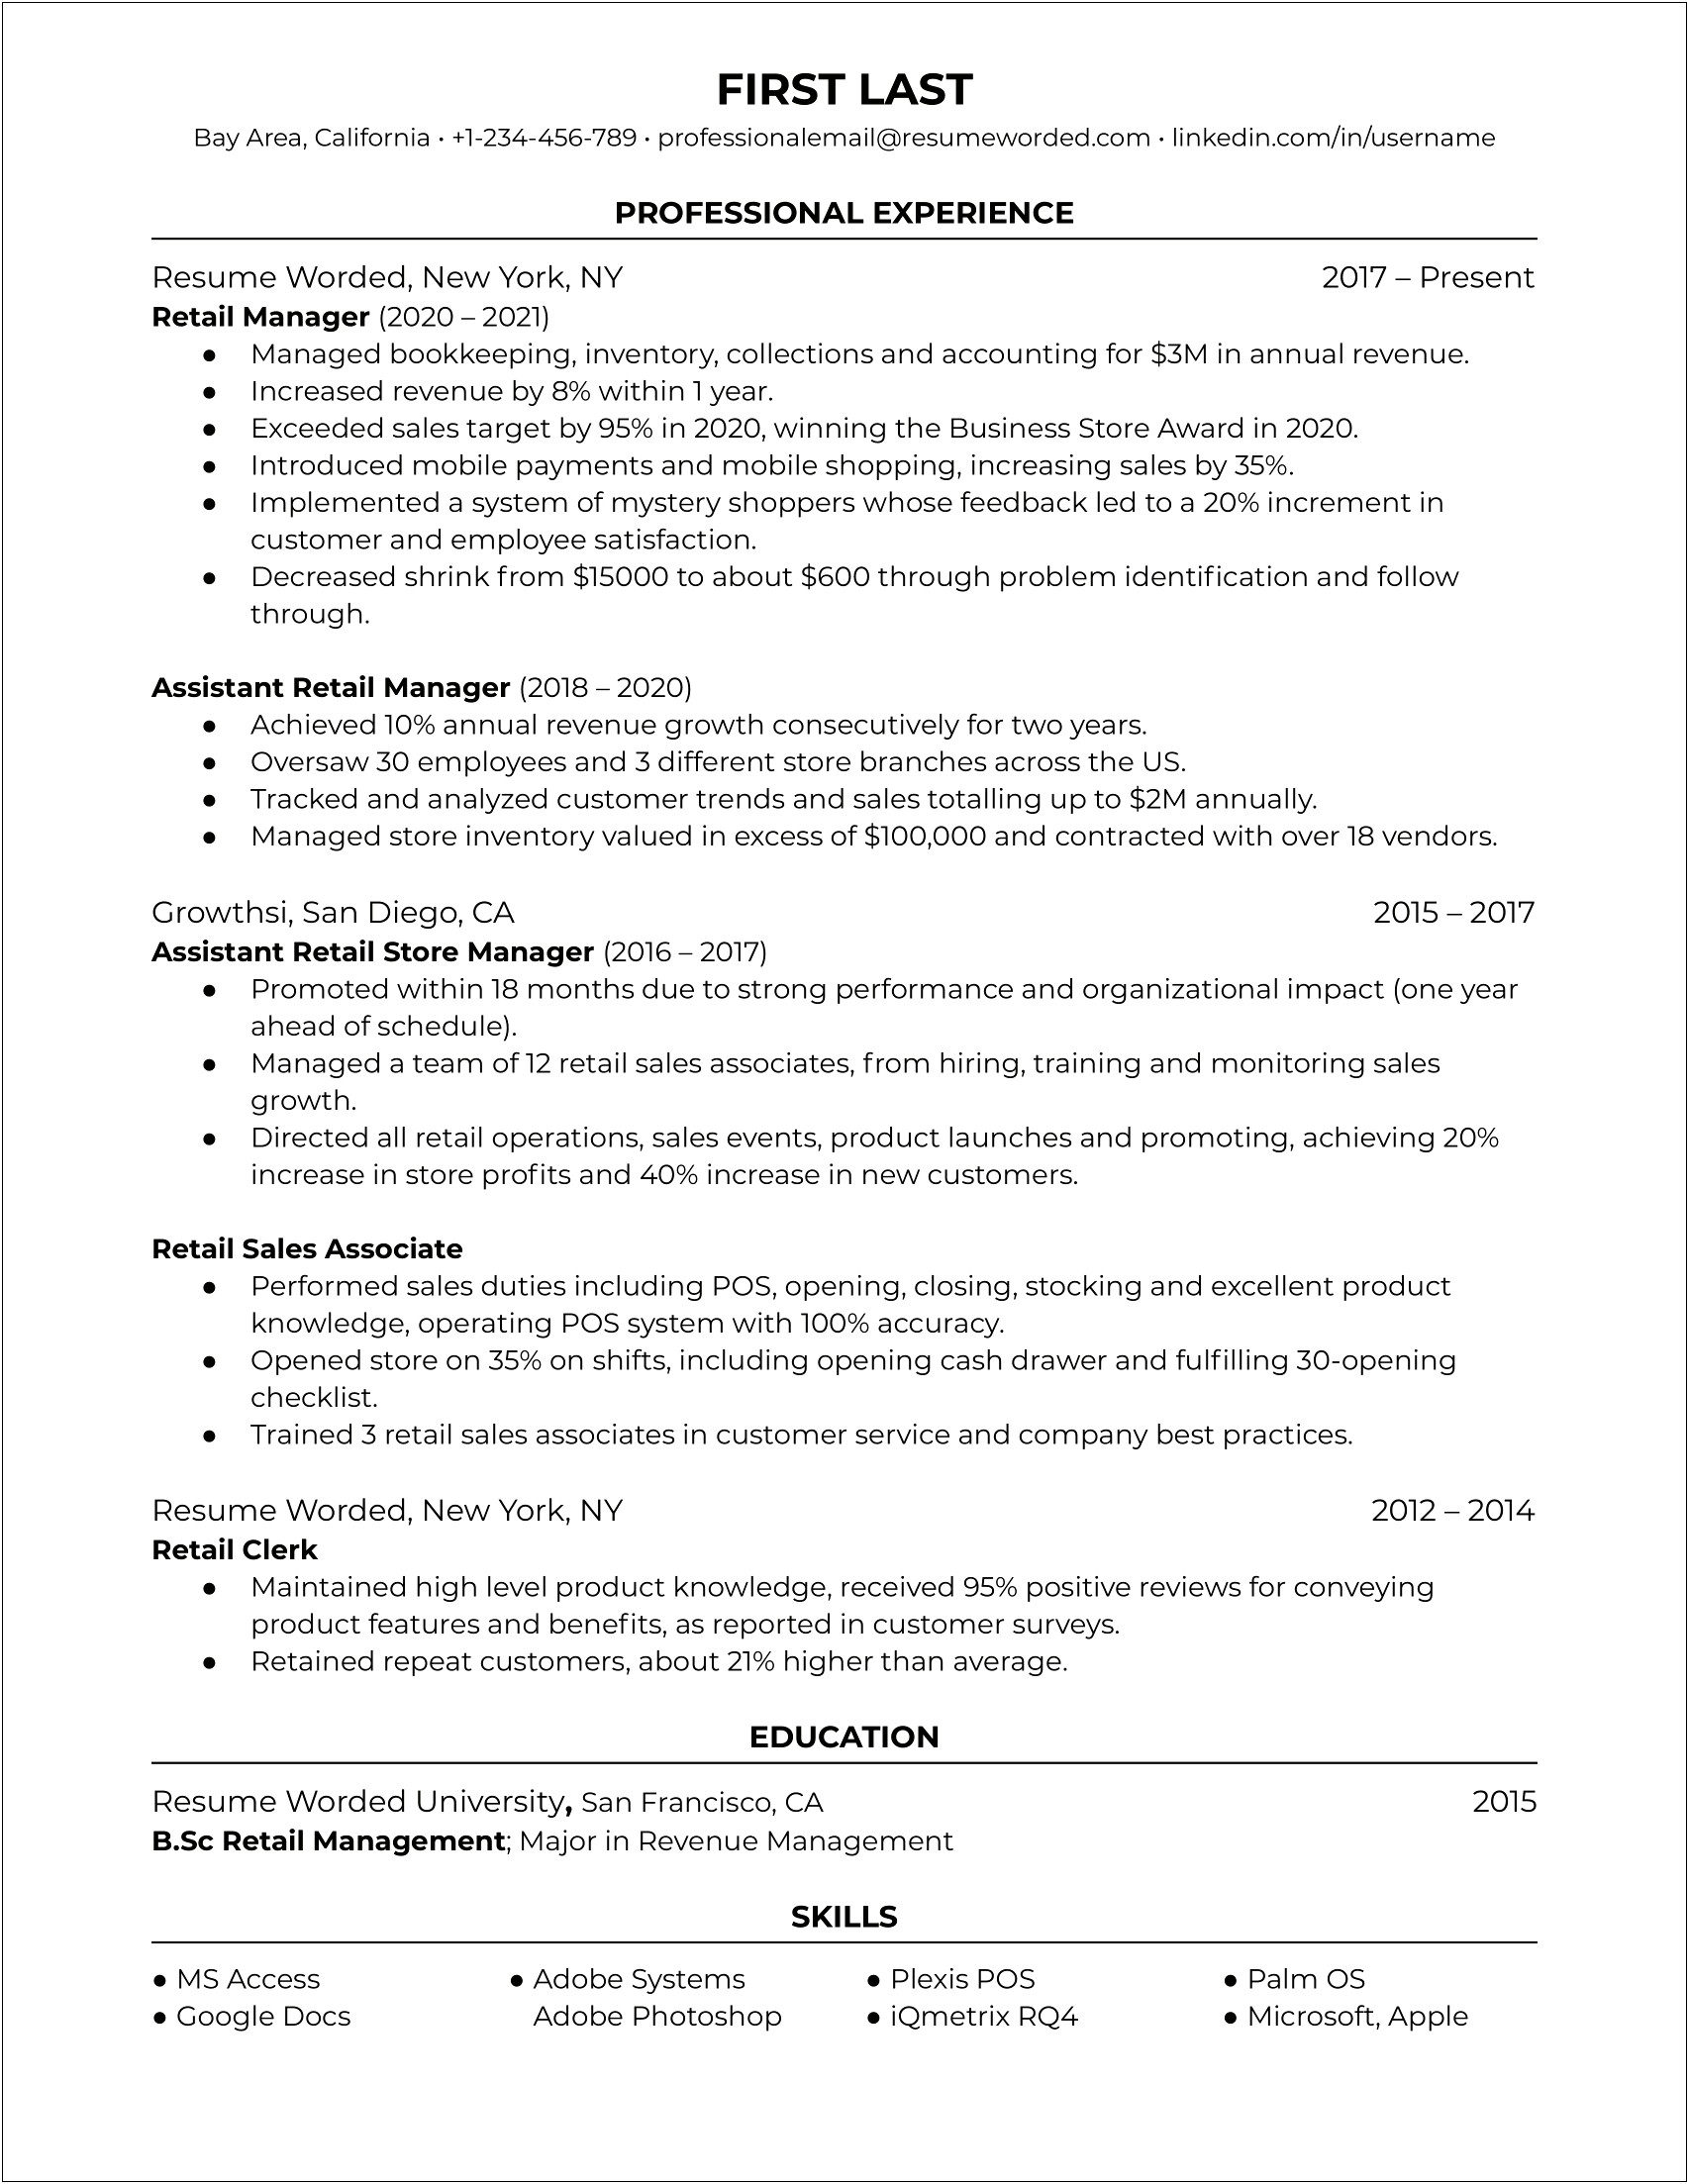 Summary Resume For A Retail Store